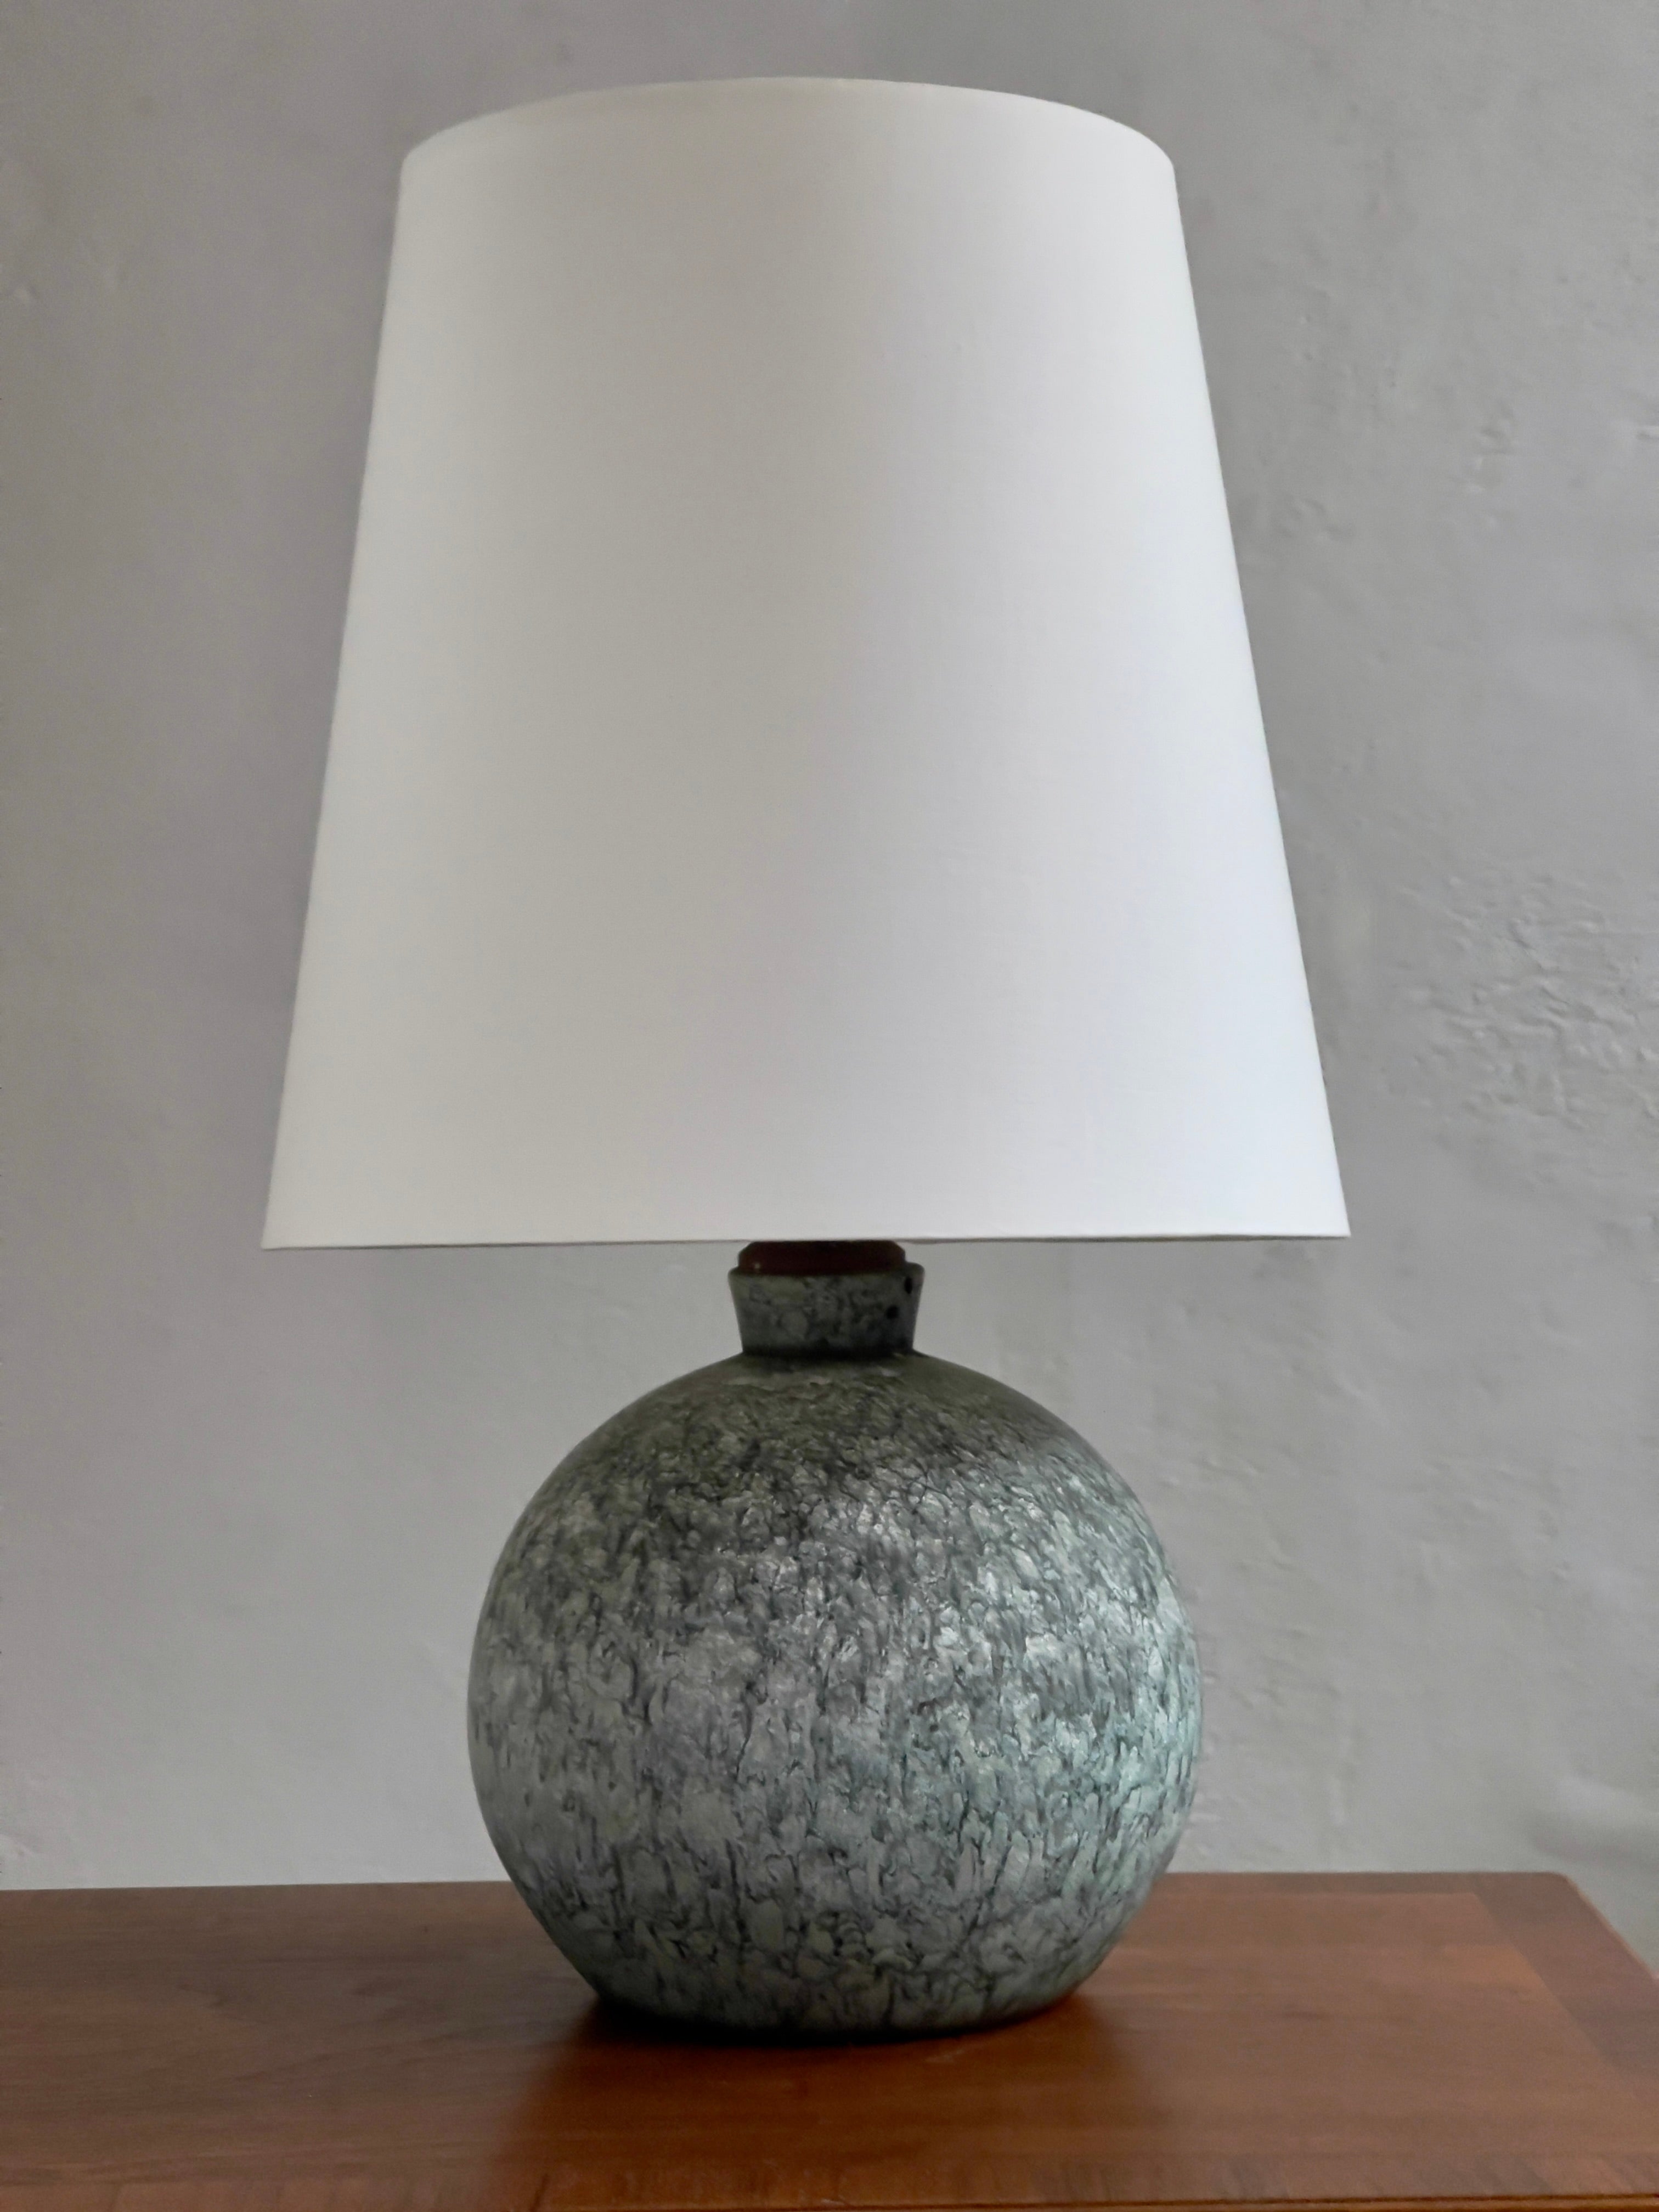 Unique 1920s danish stoneware table lamp with light blue green matte glaze. 

(The lamp will be rewired with a fabric wire to 110 or 220 V plug)

In the dim corridors of time, where craftsmanship and artistic expression converged, we find ourselves